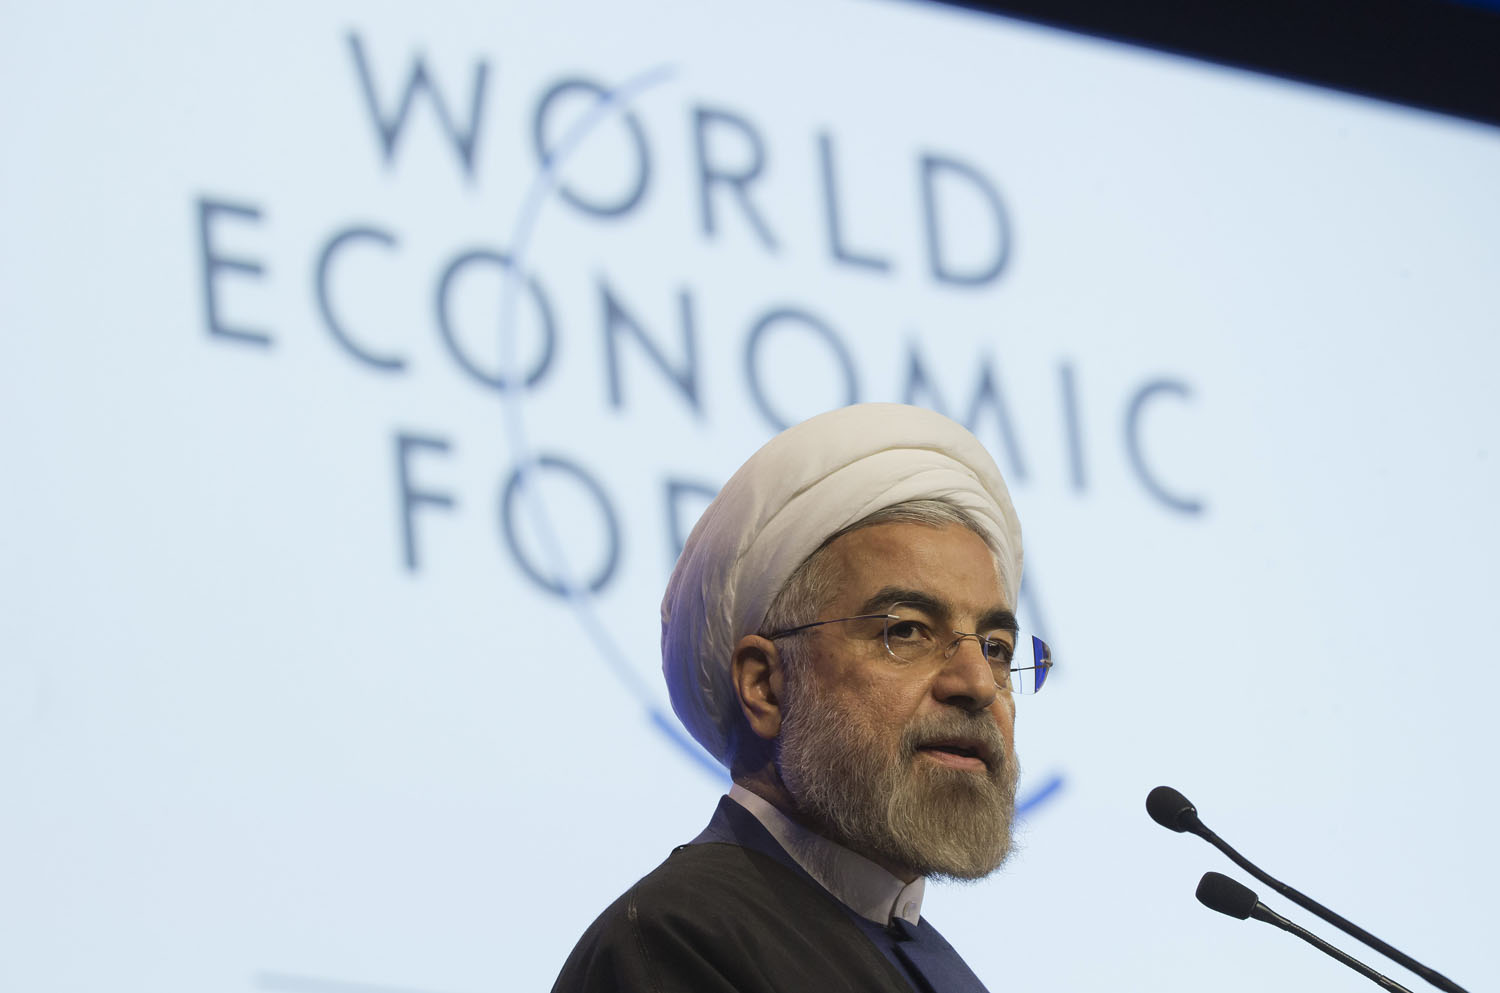 Iranian President Hassan Rouhani, speaks during a session of the World Economic Forum in Davos, Switzerland, Jan. 23, 2014. Iran's economy is showing signs of recovery after a breakthrough in the negotiations over the country's nuclear program has allowed an easing of some economic sanctions. (Michel Euler&amp;mdash;AP)